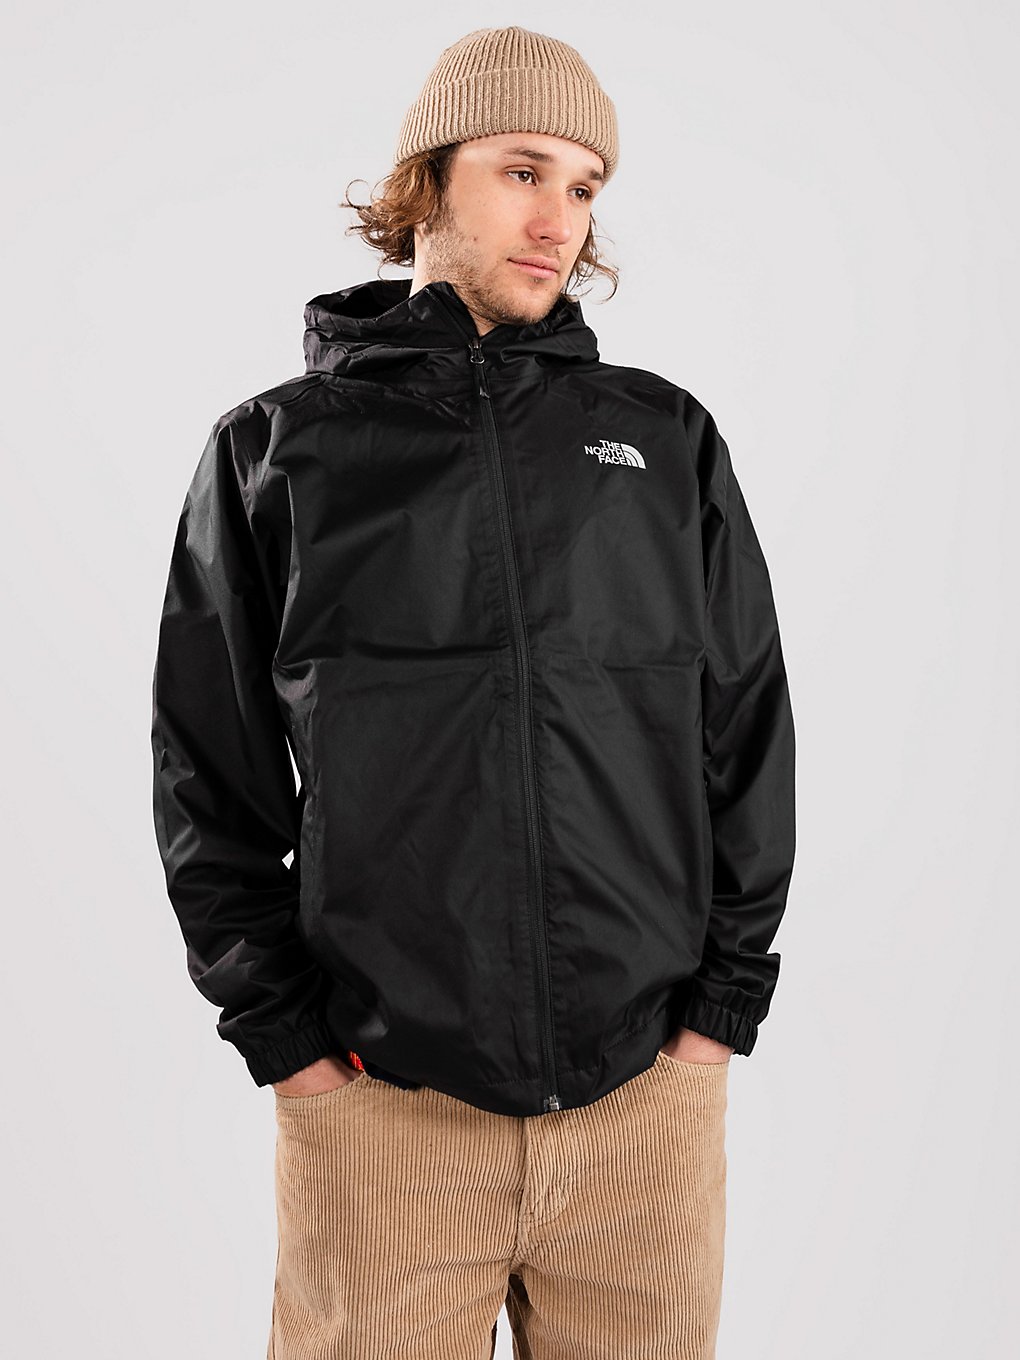 THE NORTH FACE Quest Jacke tnf black kaufen